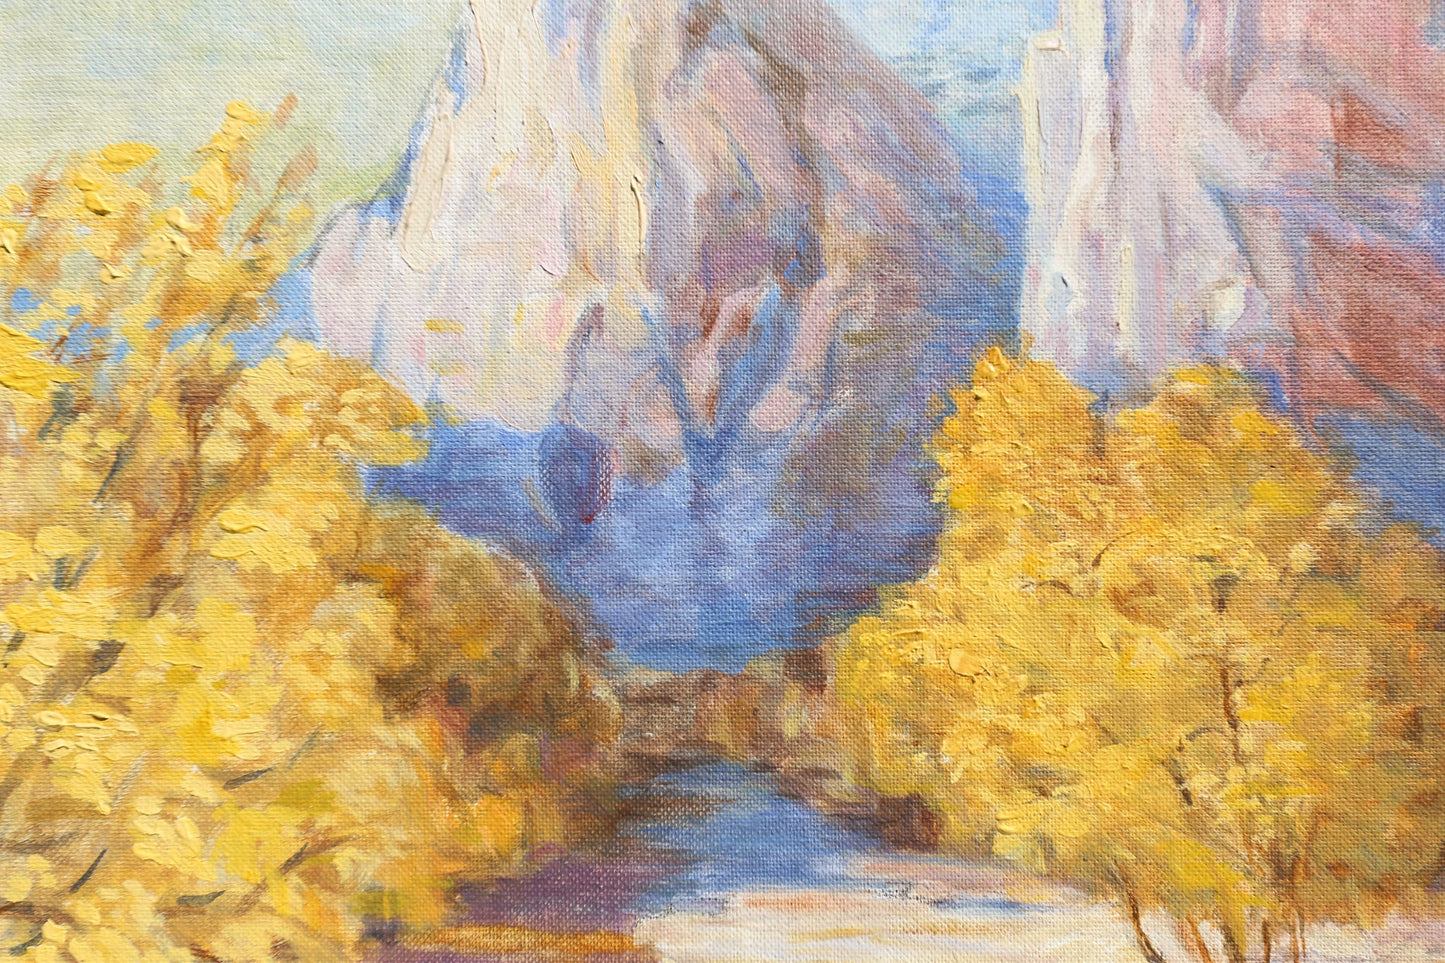 Oil Painting Landscape Treescape on Canvasboard "Connecticut Rock Formations with Autumn Fall Trees" Artist Jule Melbardis 1950s